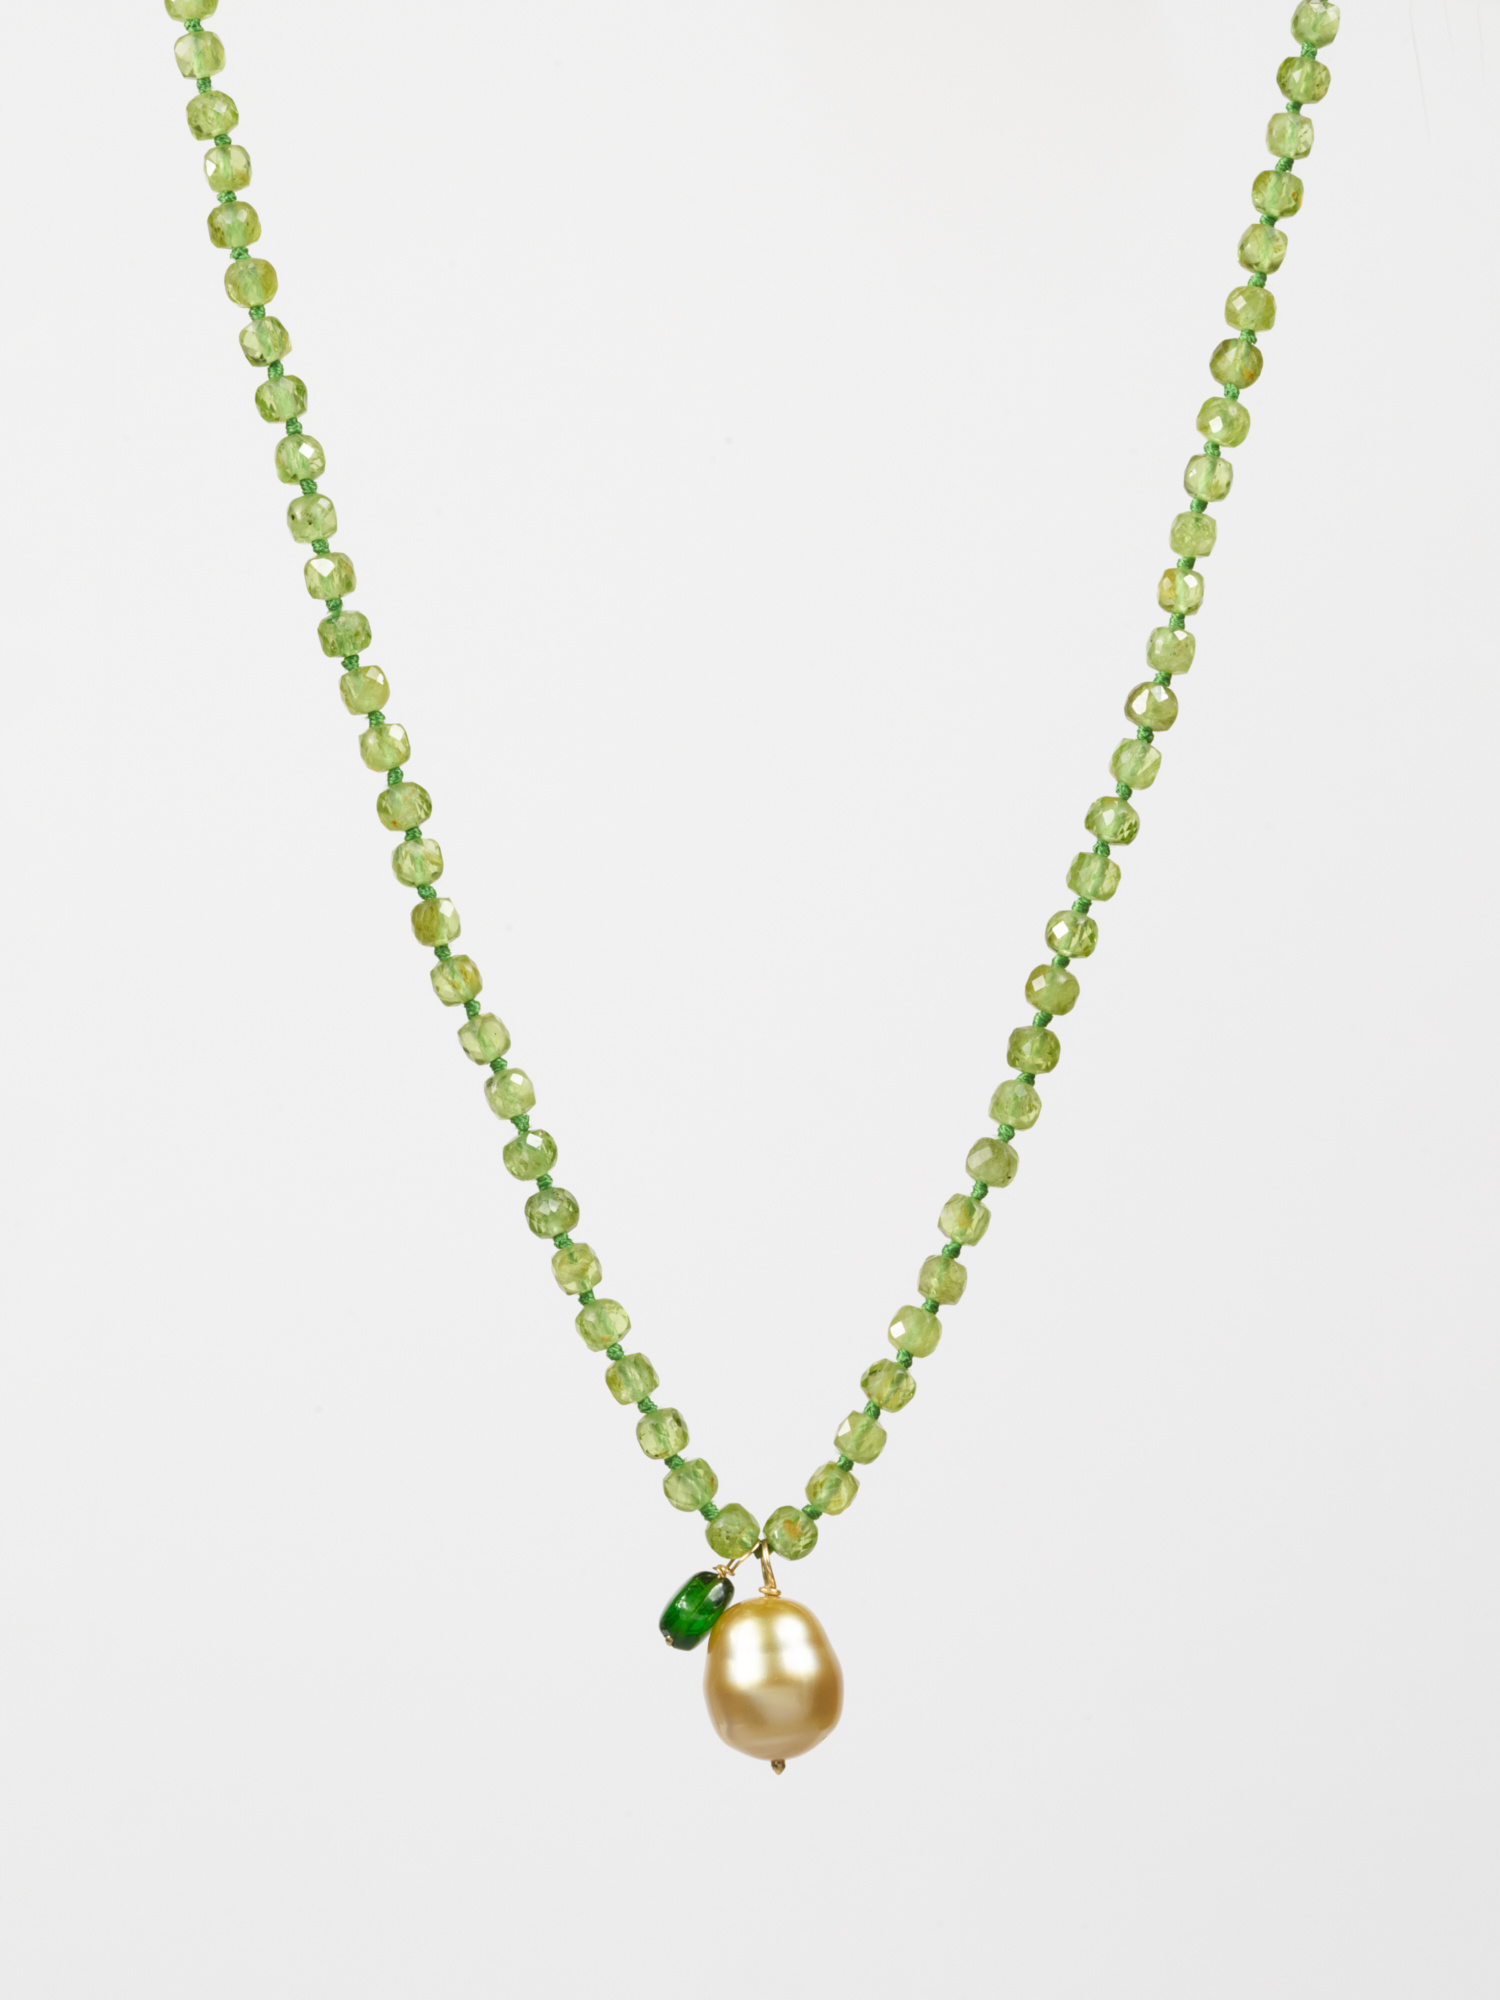 Edwardian Peridot and Seed Pearl Lavalier Necklace